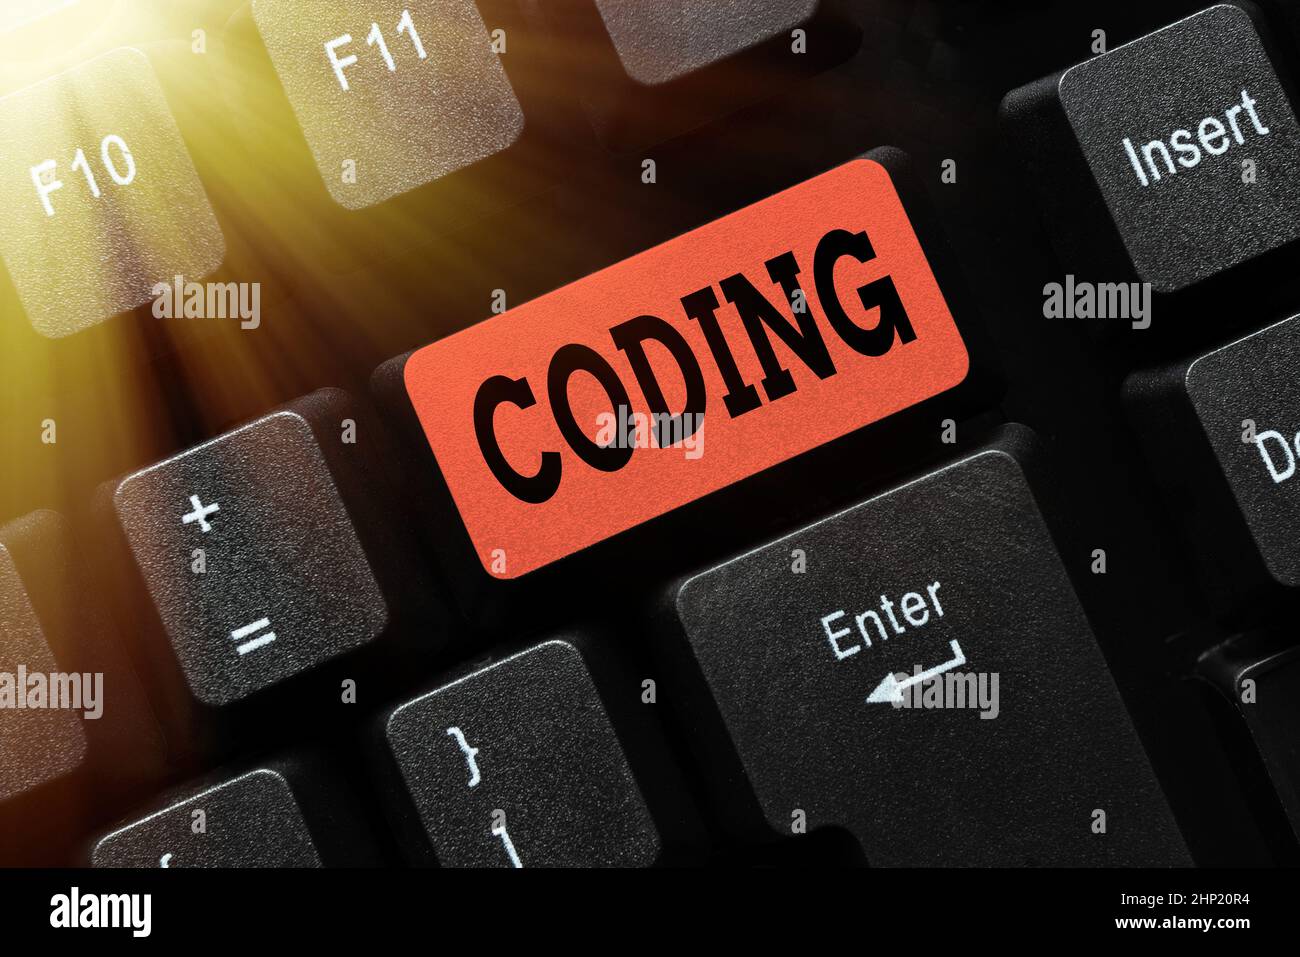 Inspiration showing sign Coding, Internet Concept assigning code to something for classification identification Retyping Download History Files, Typin Stock Photo